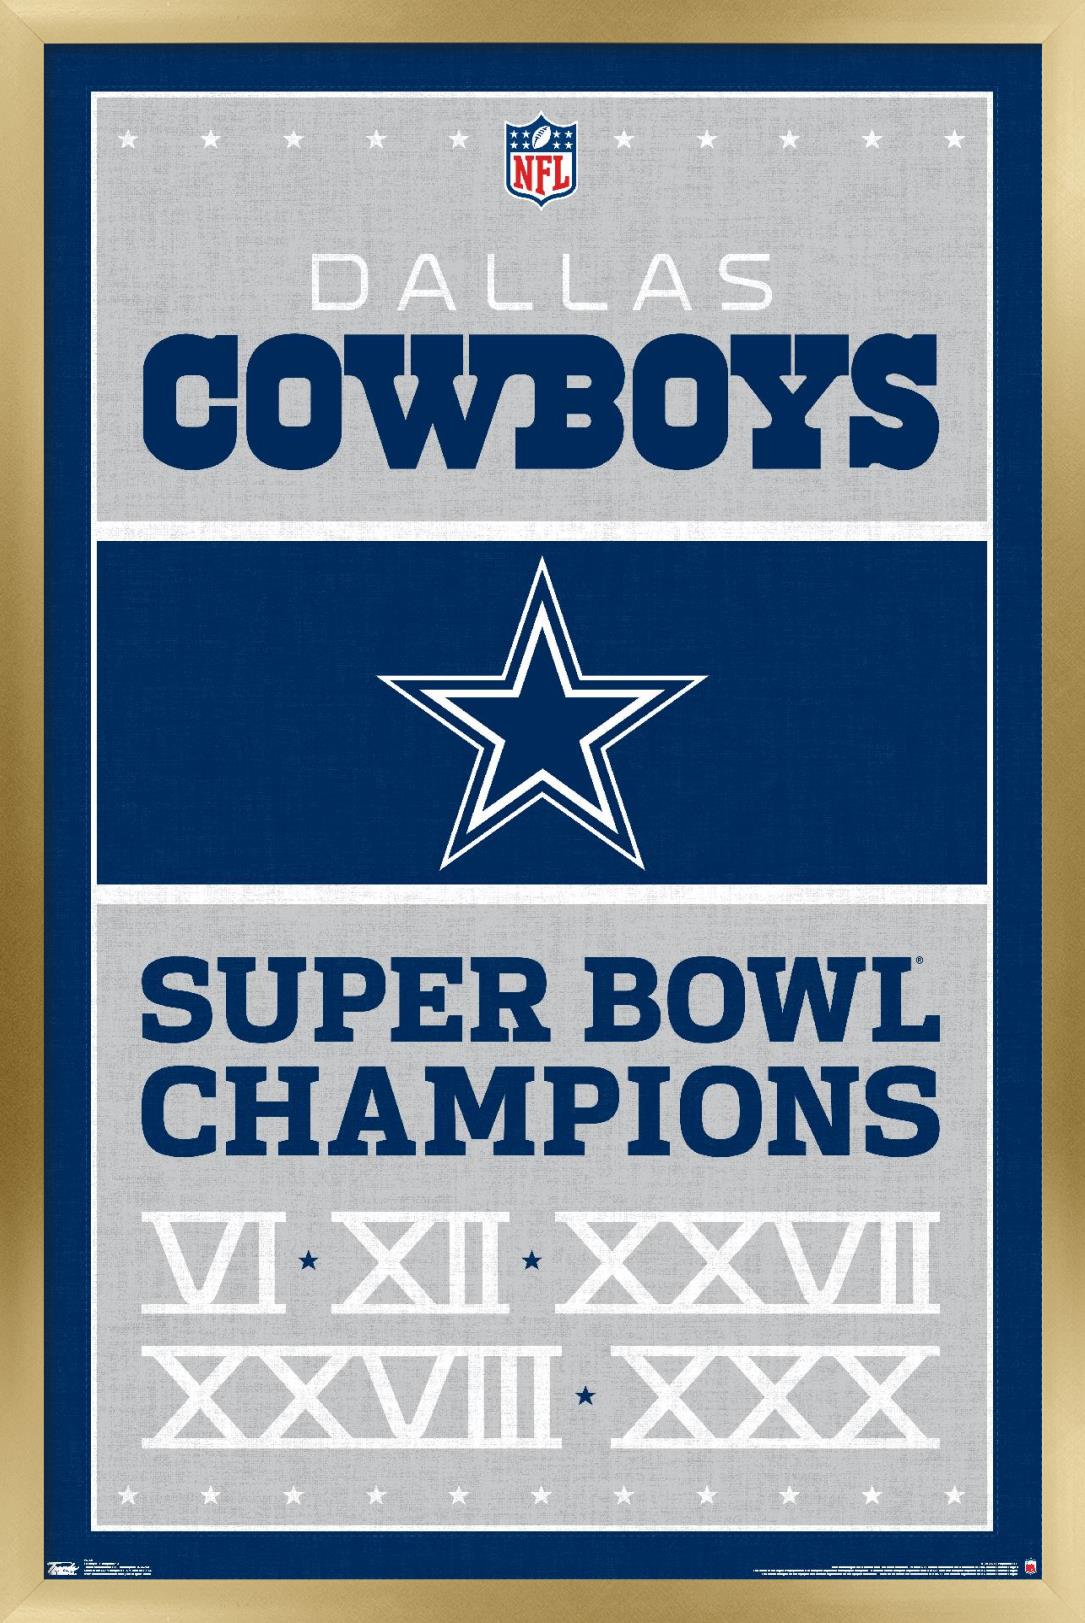 NFL Dallas Cowboys - Champions 13 Wall Poster, 22.375" x 34", Framed - image 1 of 6